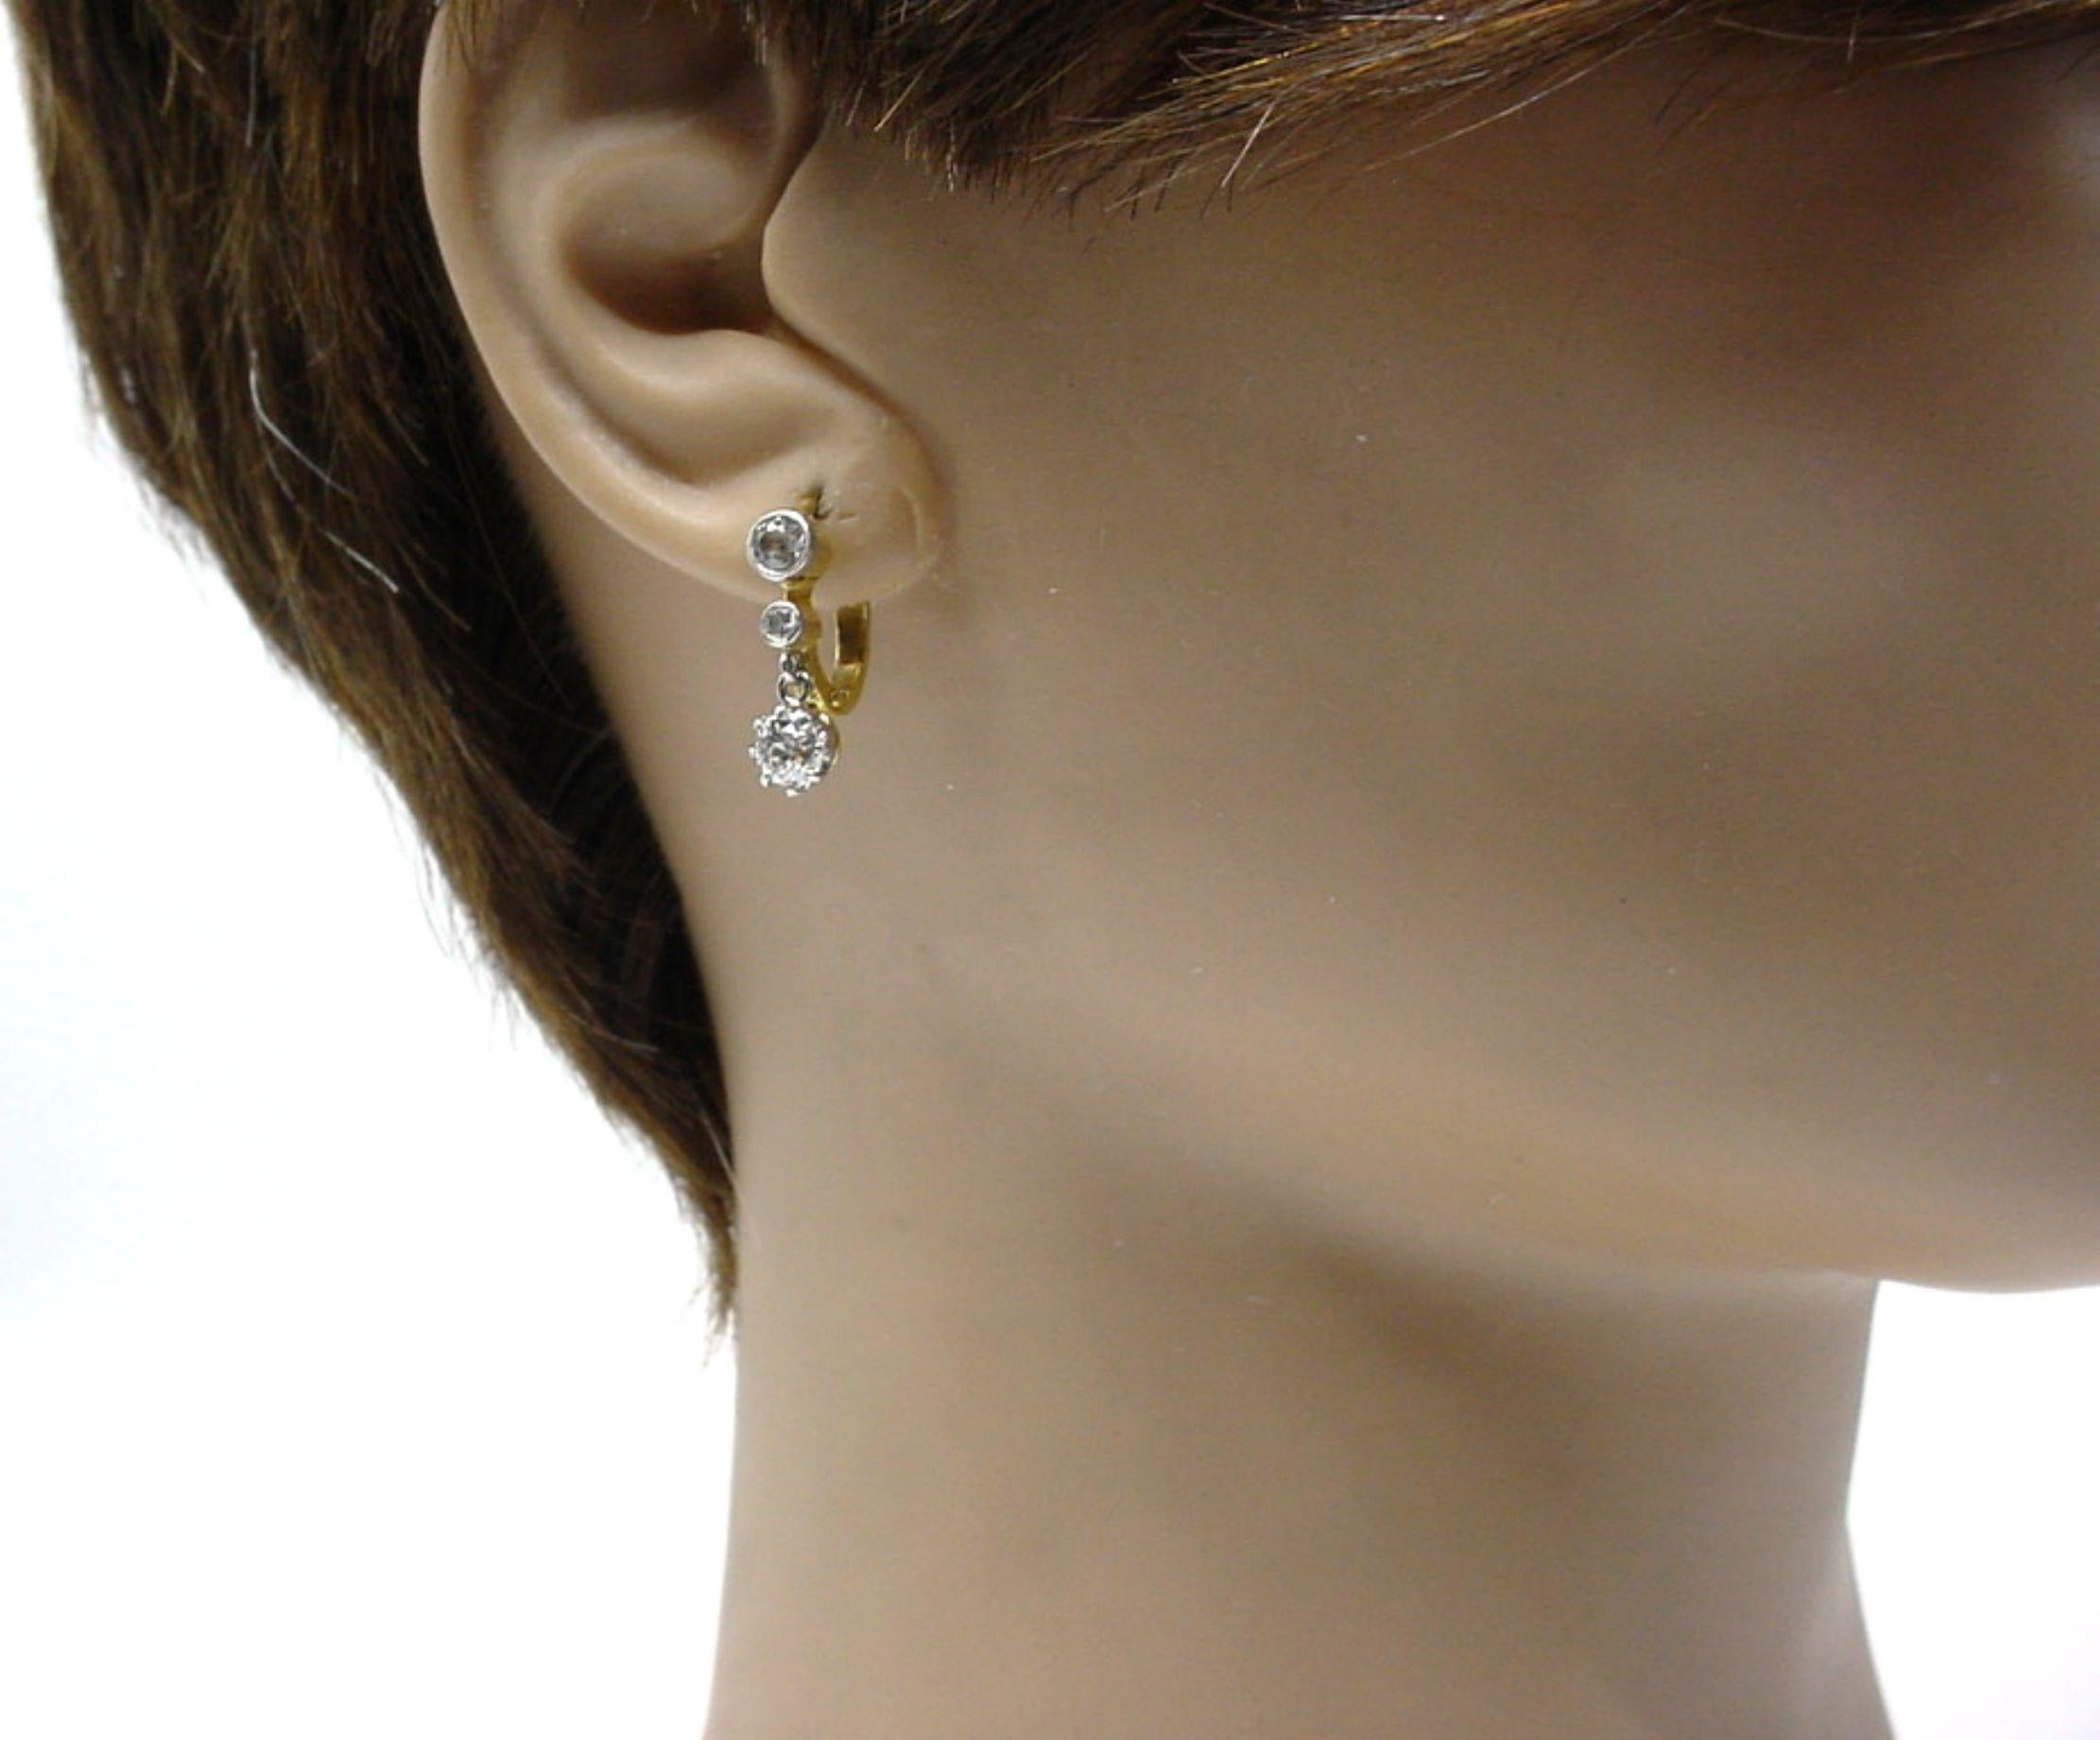 Edwardian 4-Tier OEC Diamond Platinum Top Gold Drop Earrings In Good Condition For Sale In Santa Rosa, CA